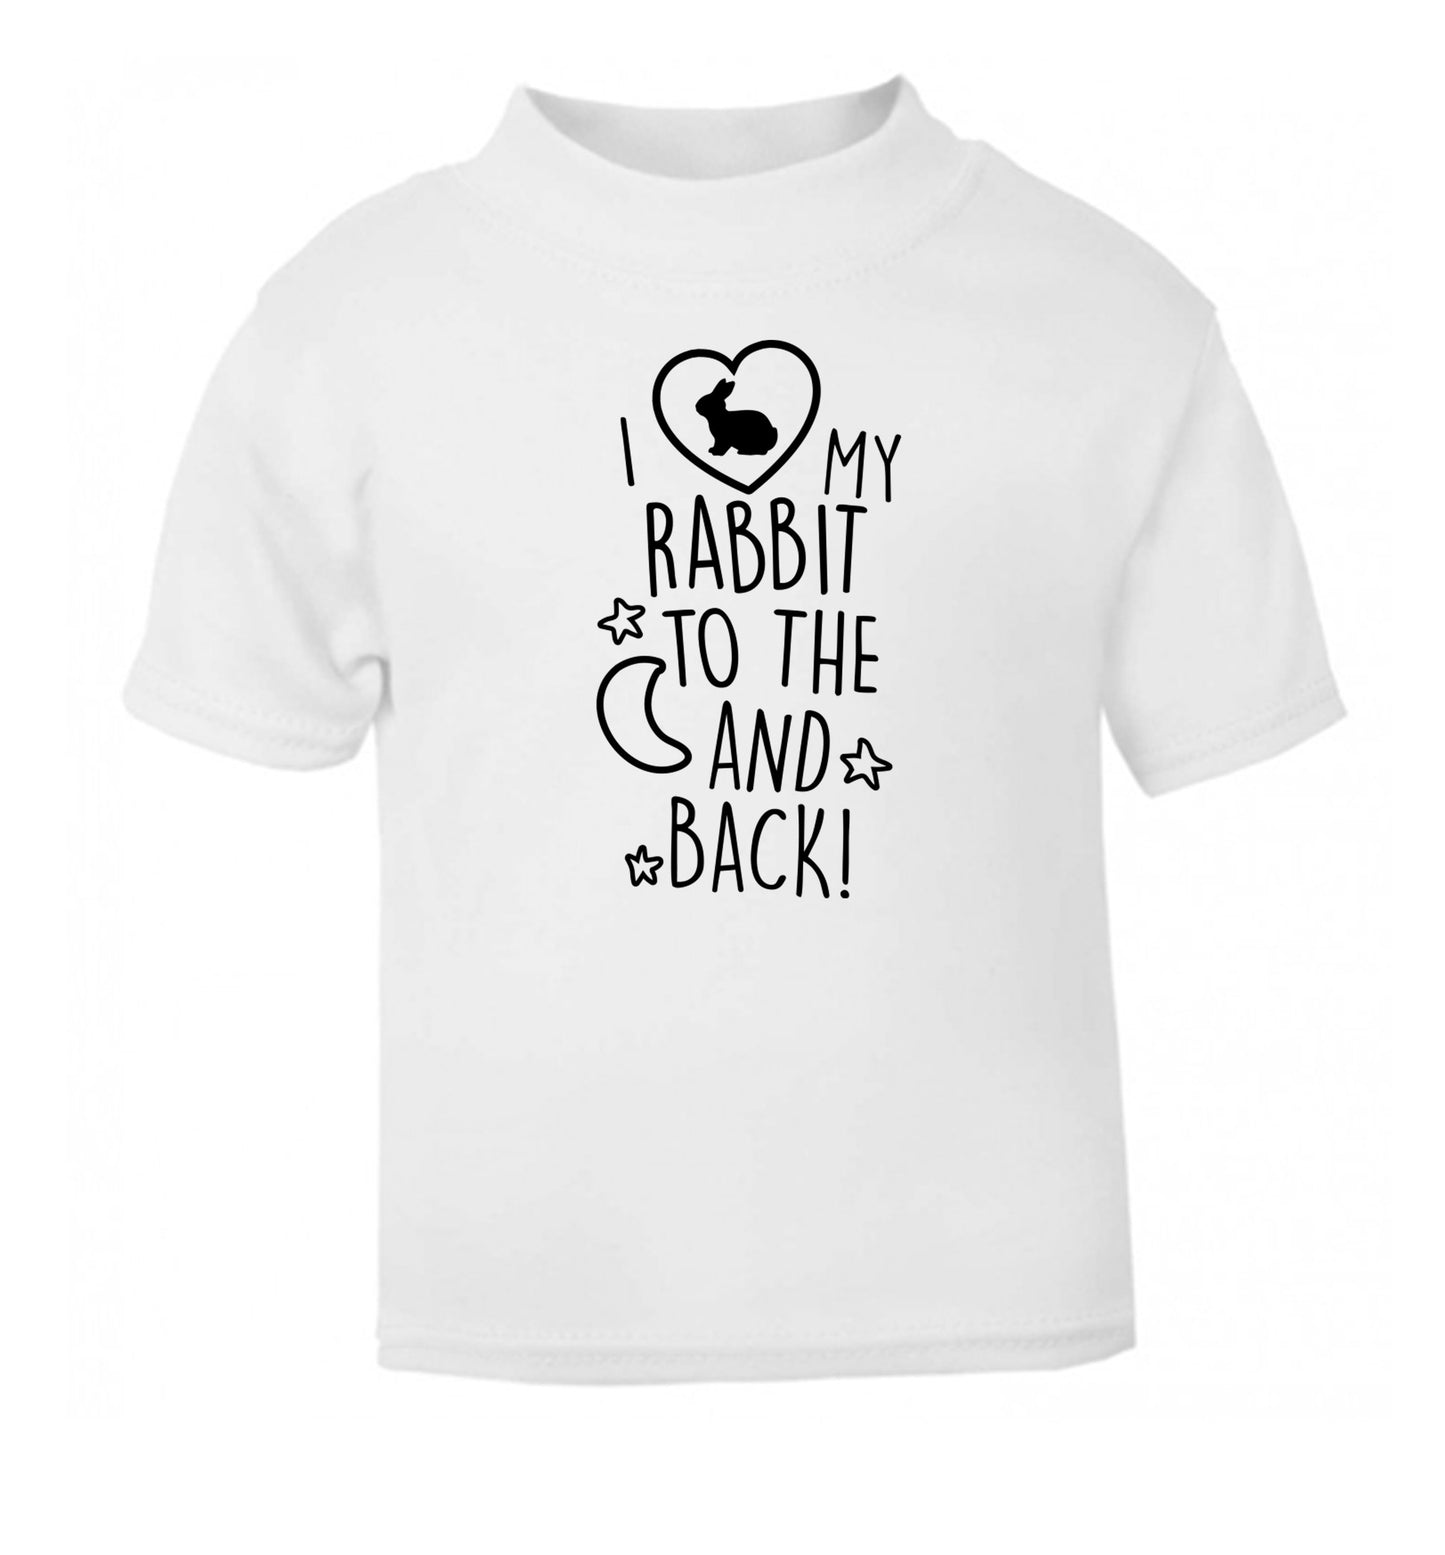 I love my rabbit to the moon and back white Baby Toddler Tshirt 2 Years